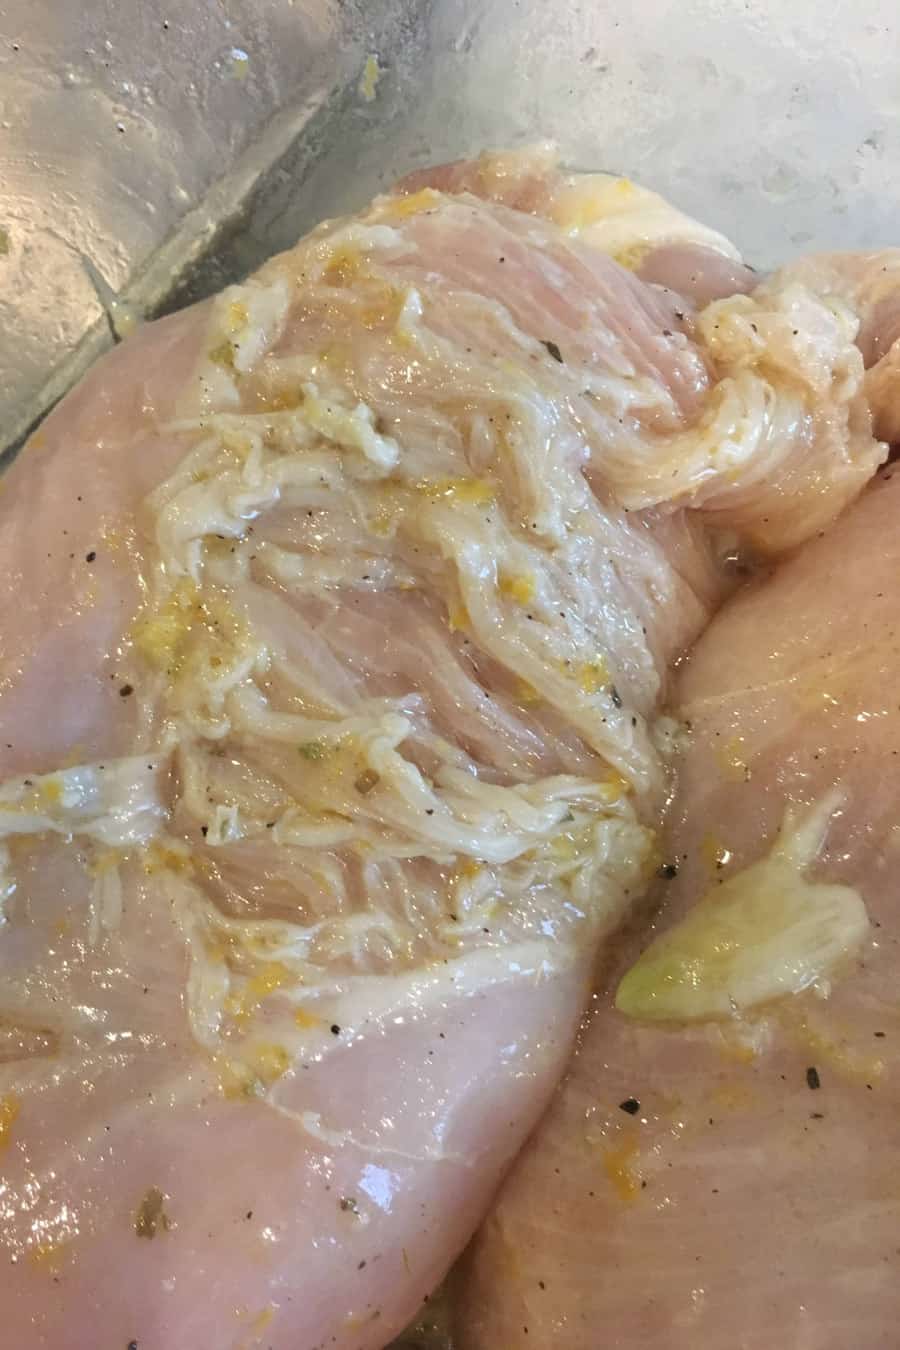 how long can you leave uncooked chicken out